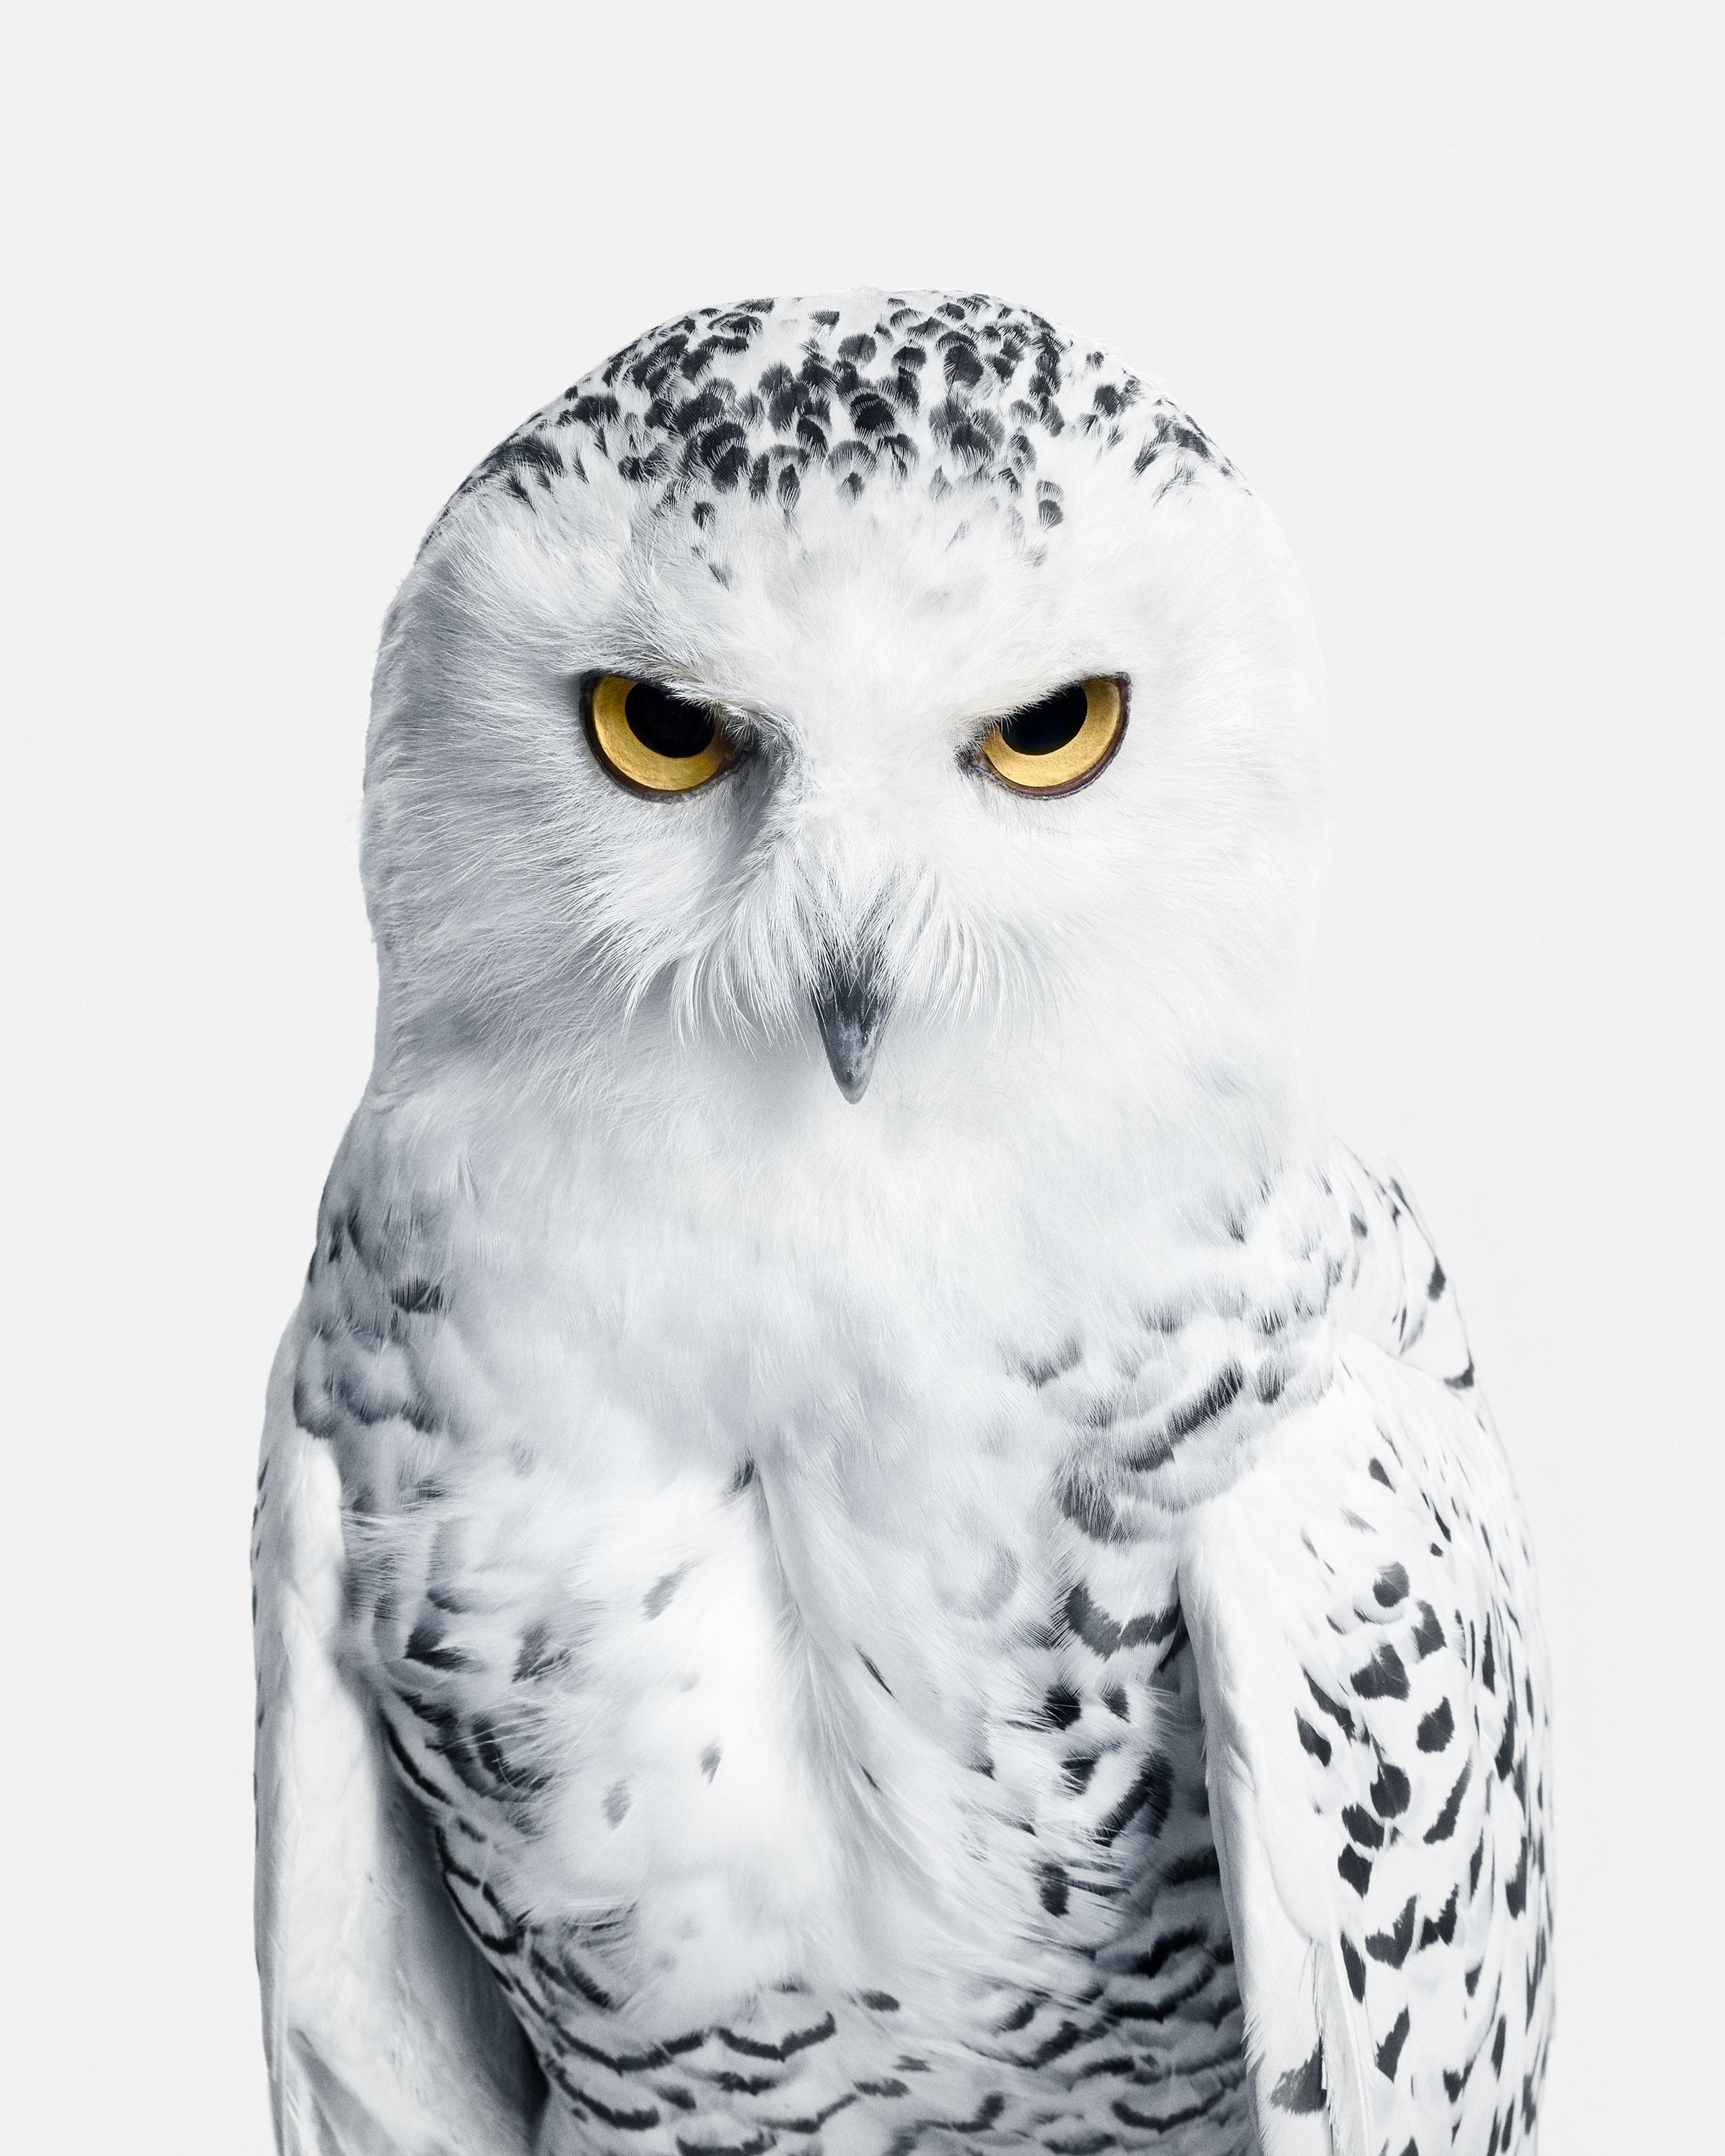 Randal Ford Color Photograph - Snowy Owl No. 3 (37.5" x 30")